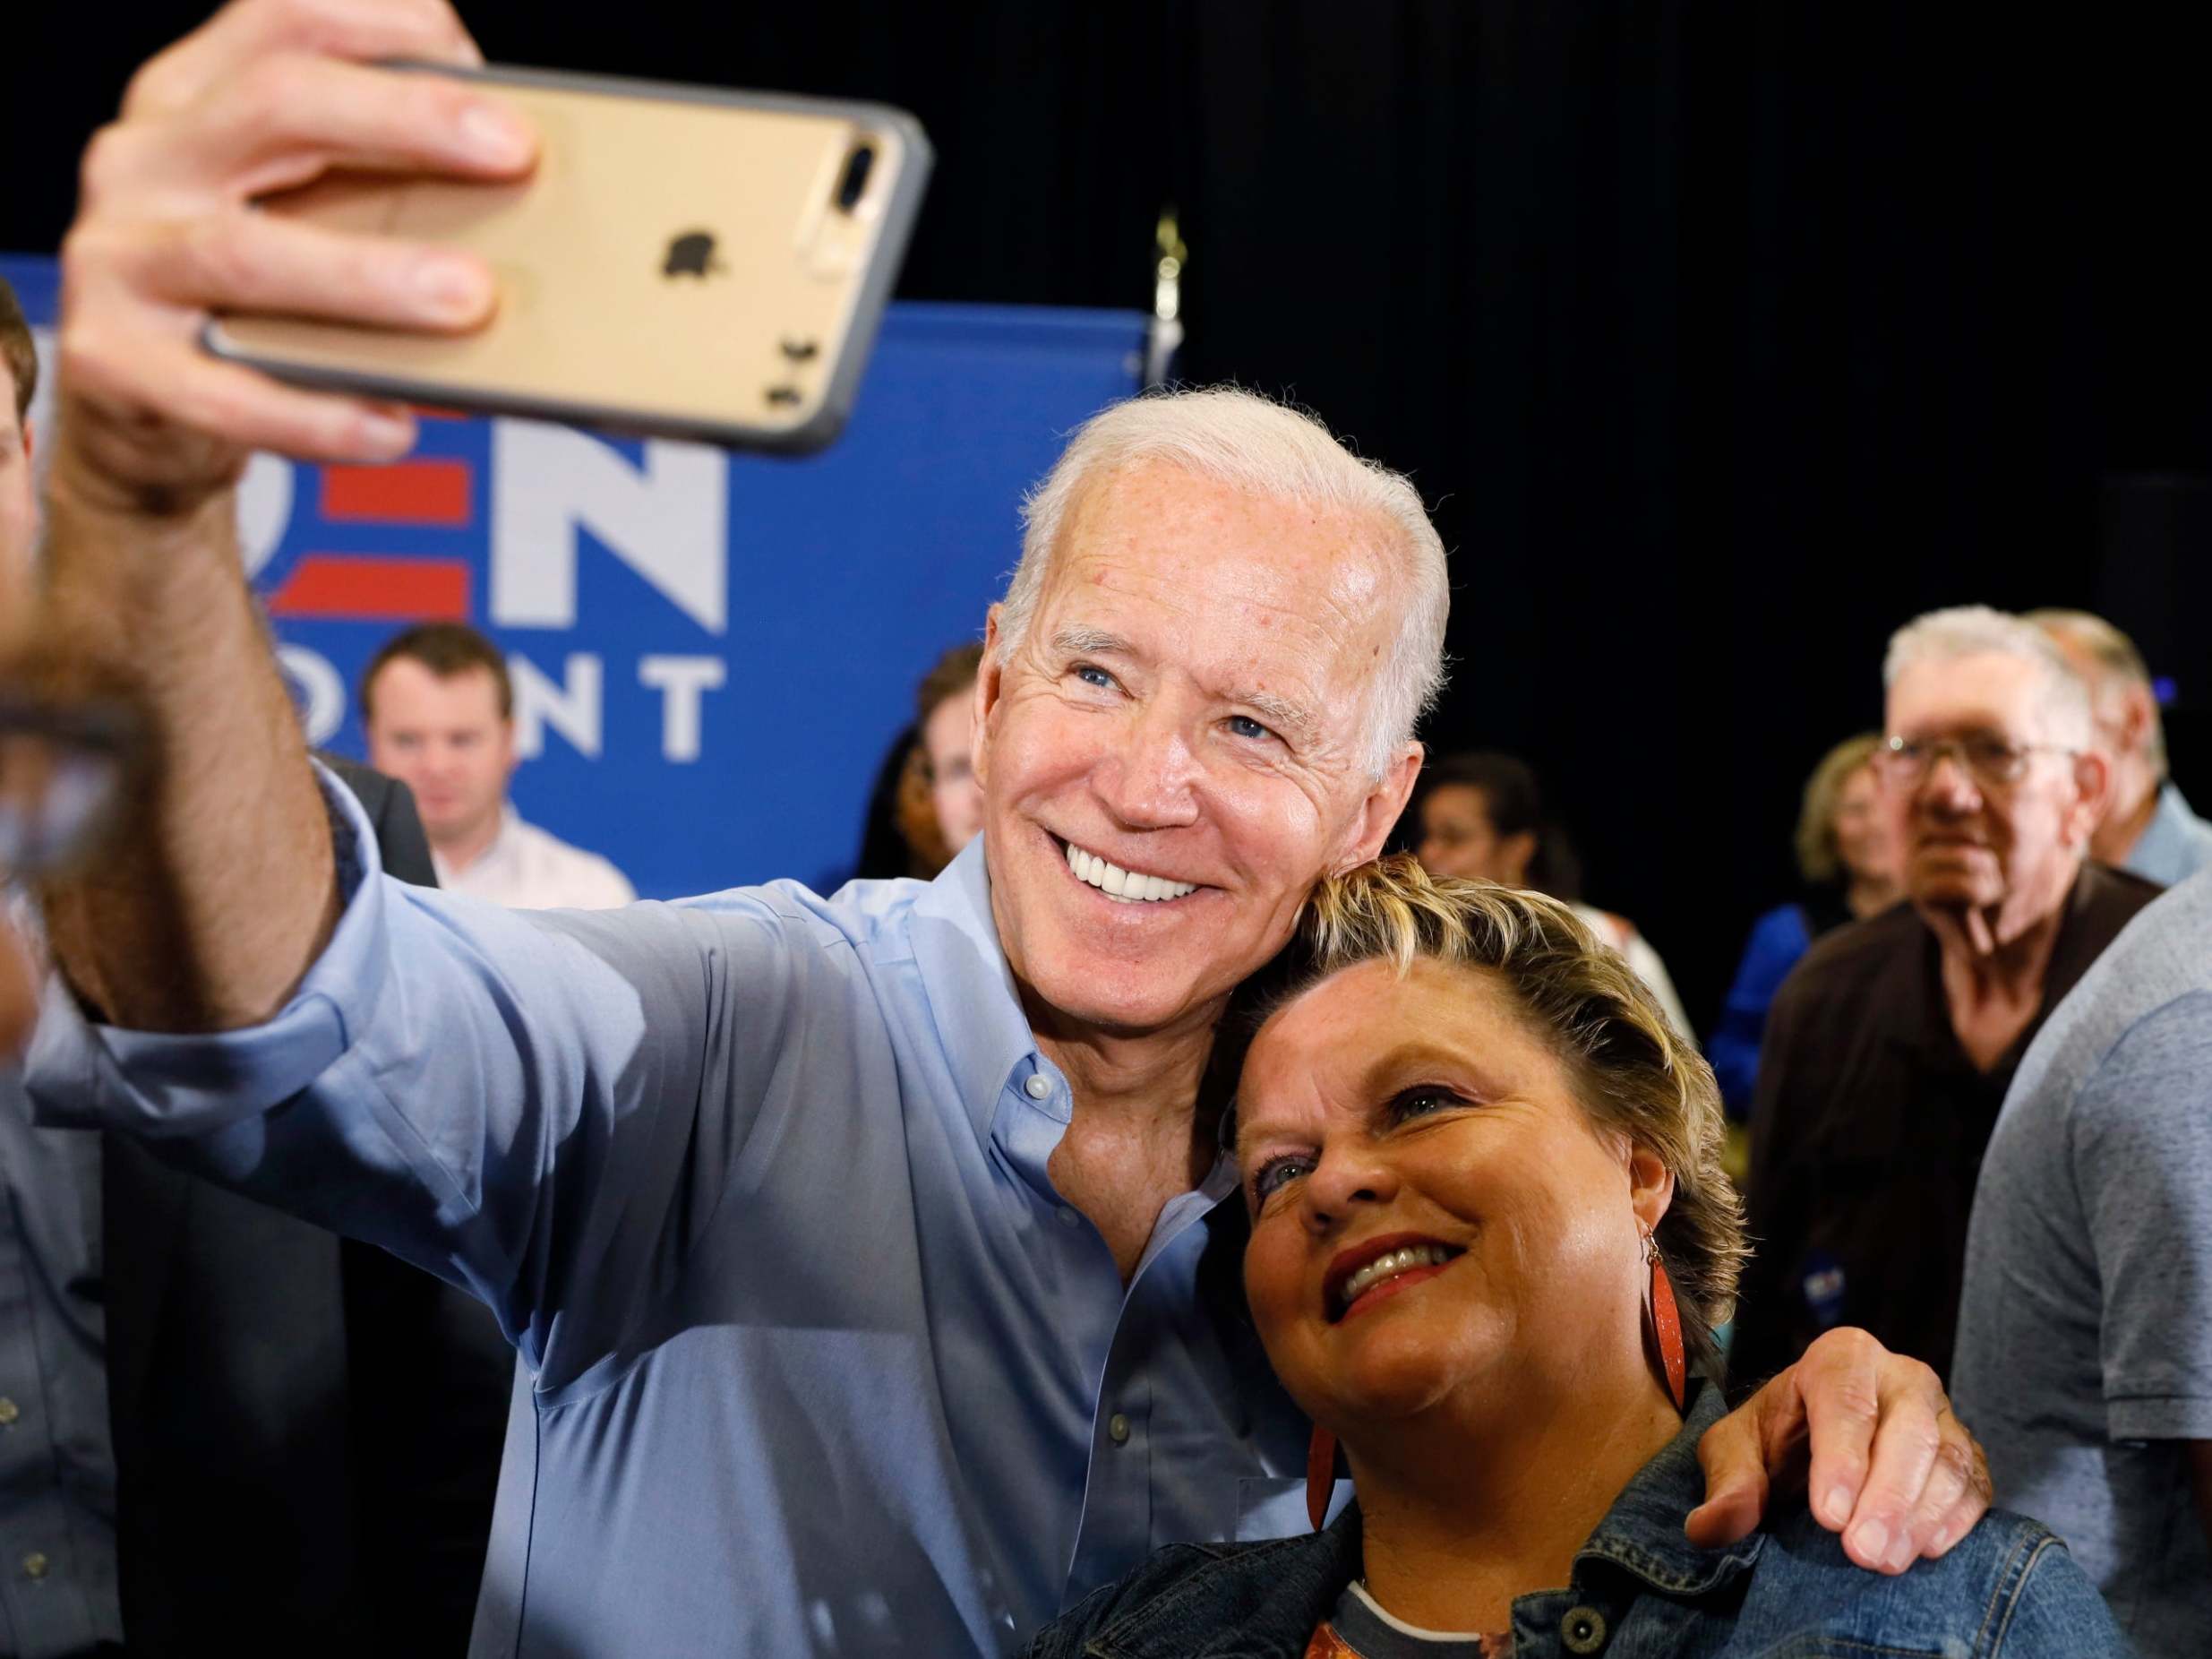 Joe Biden has come under fire this week for praising the 'civil' debates he was personally able to have with segregationists in the past